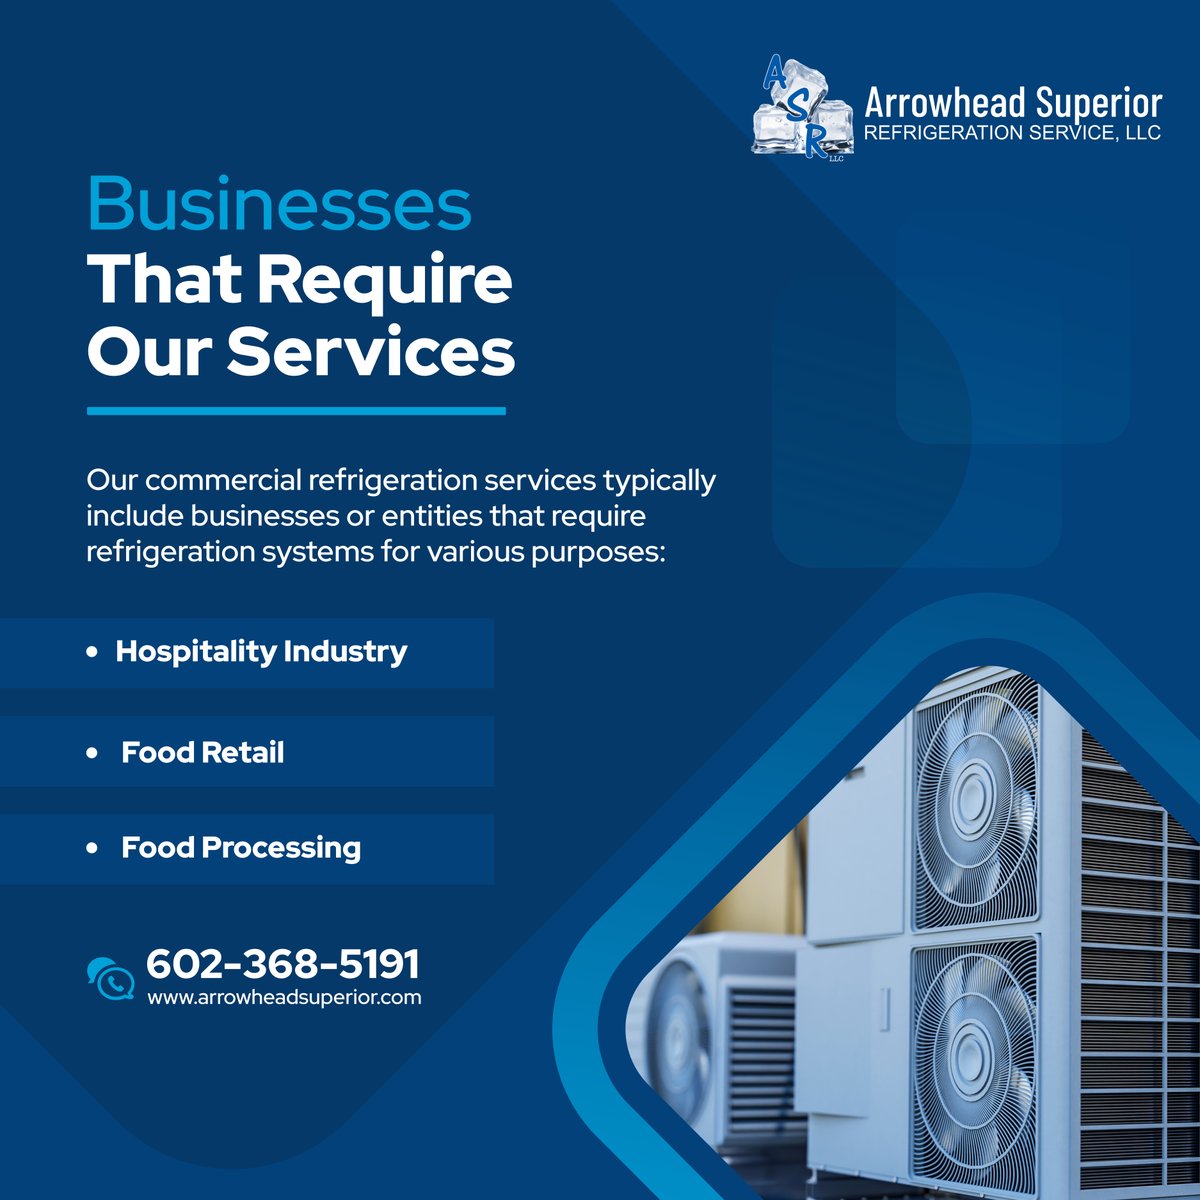 Our top-notch commercial refrigeration services are available for restaurants, grocery stores, supermarkets, convenience stores, and even cafeteria facilities in Arizona. 

#PeoriaArizona #CommercialRefrigerationServices #FoodRetailCooling #FoodProcessingCooling #CoolingServices